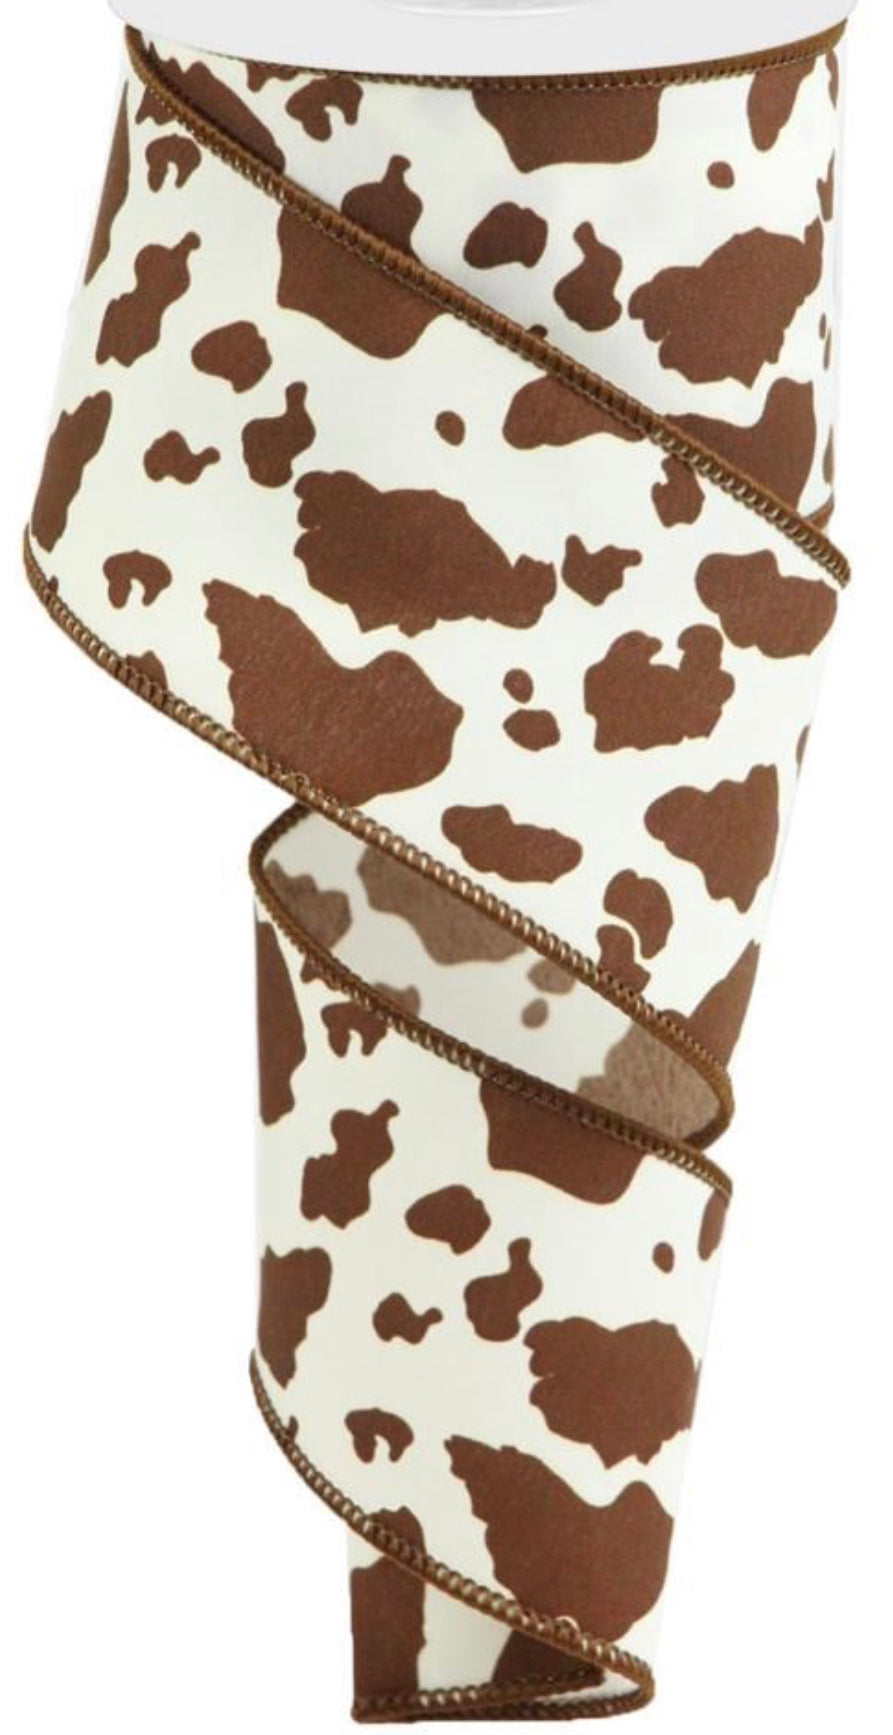 10 Yards - 2.5” Wired Brown and Cream Cow Print Ribbon